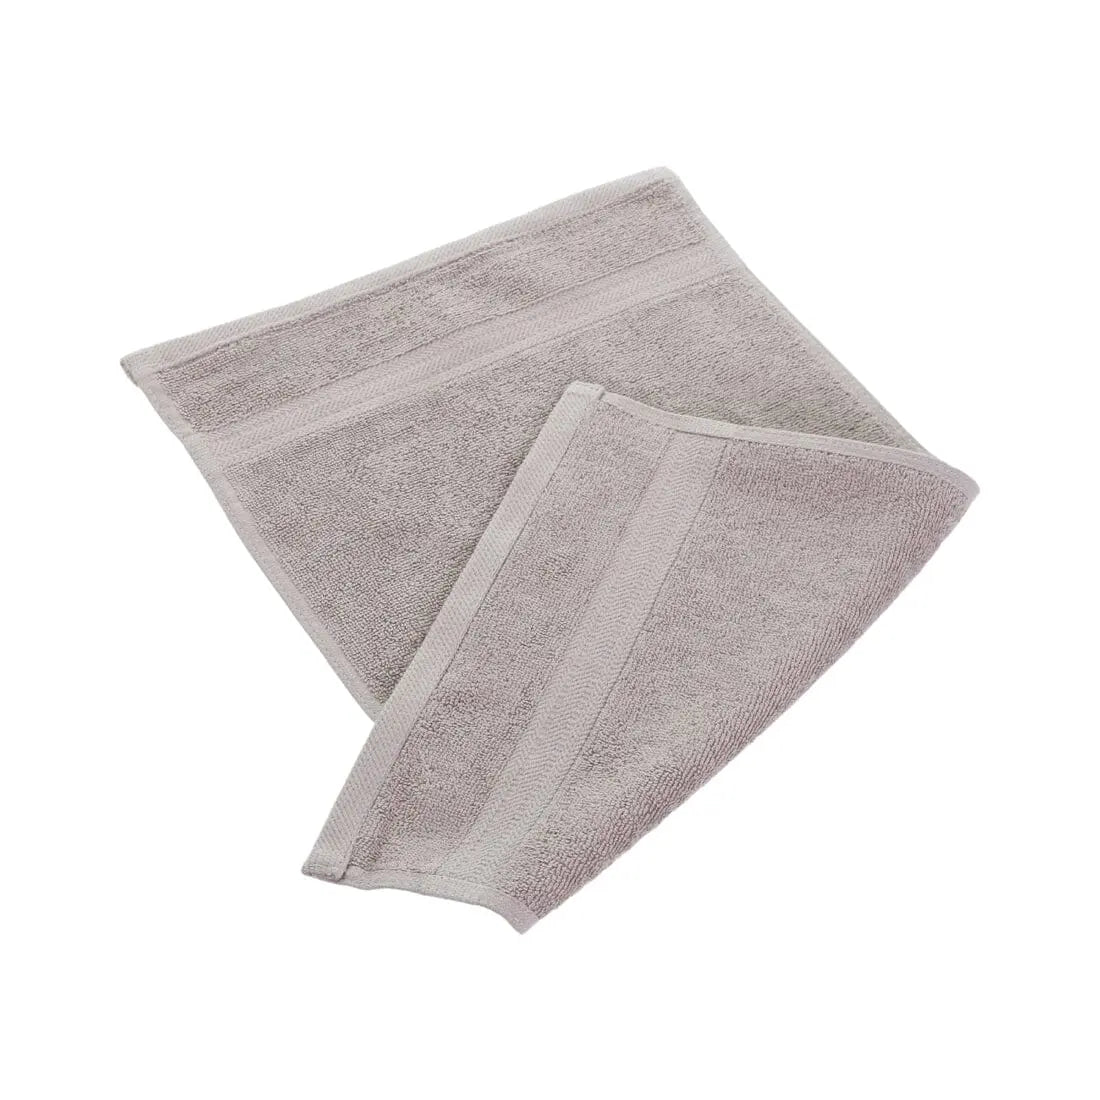 Beige egyptian cotton towel ideal for the gym